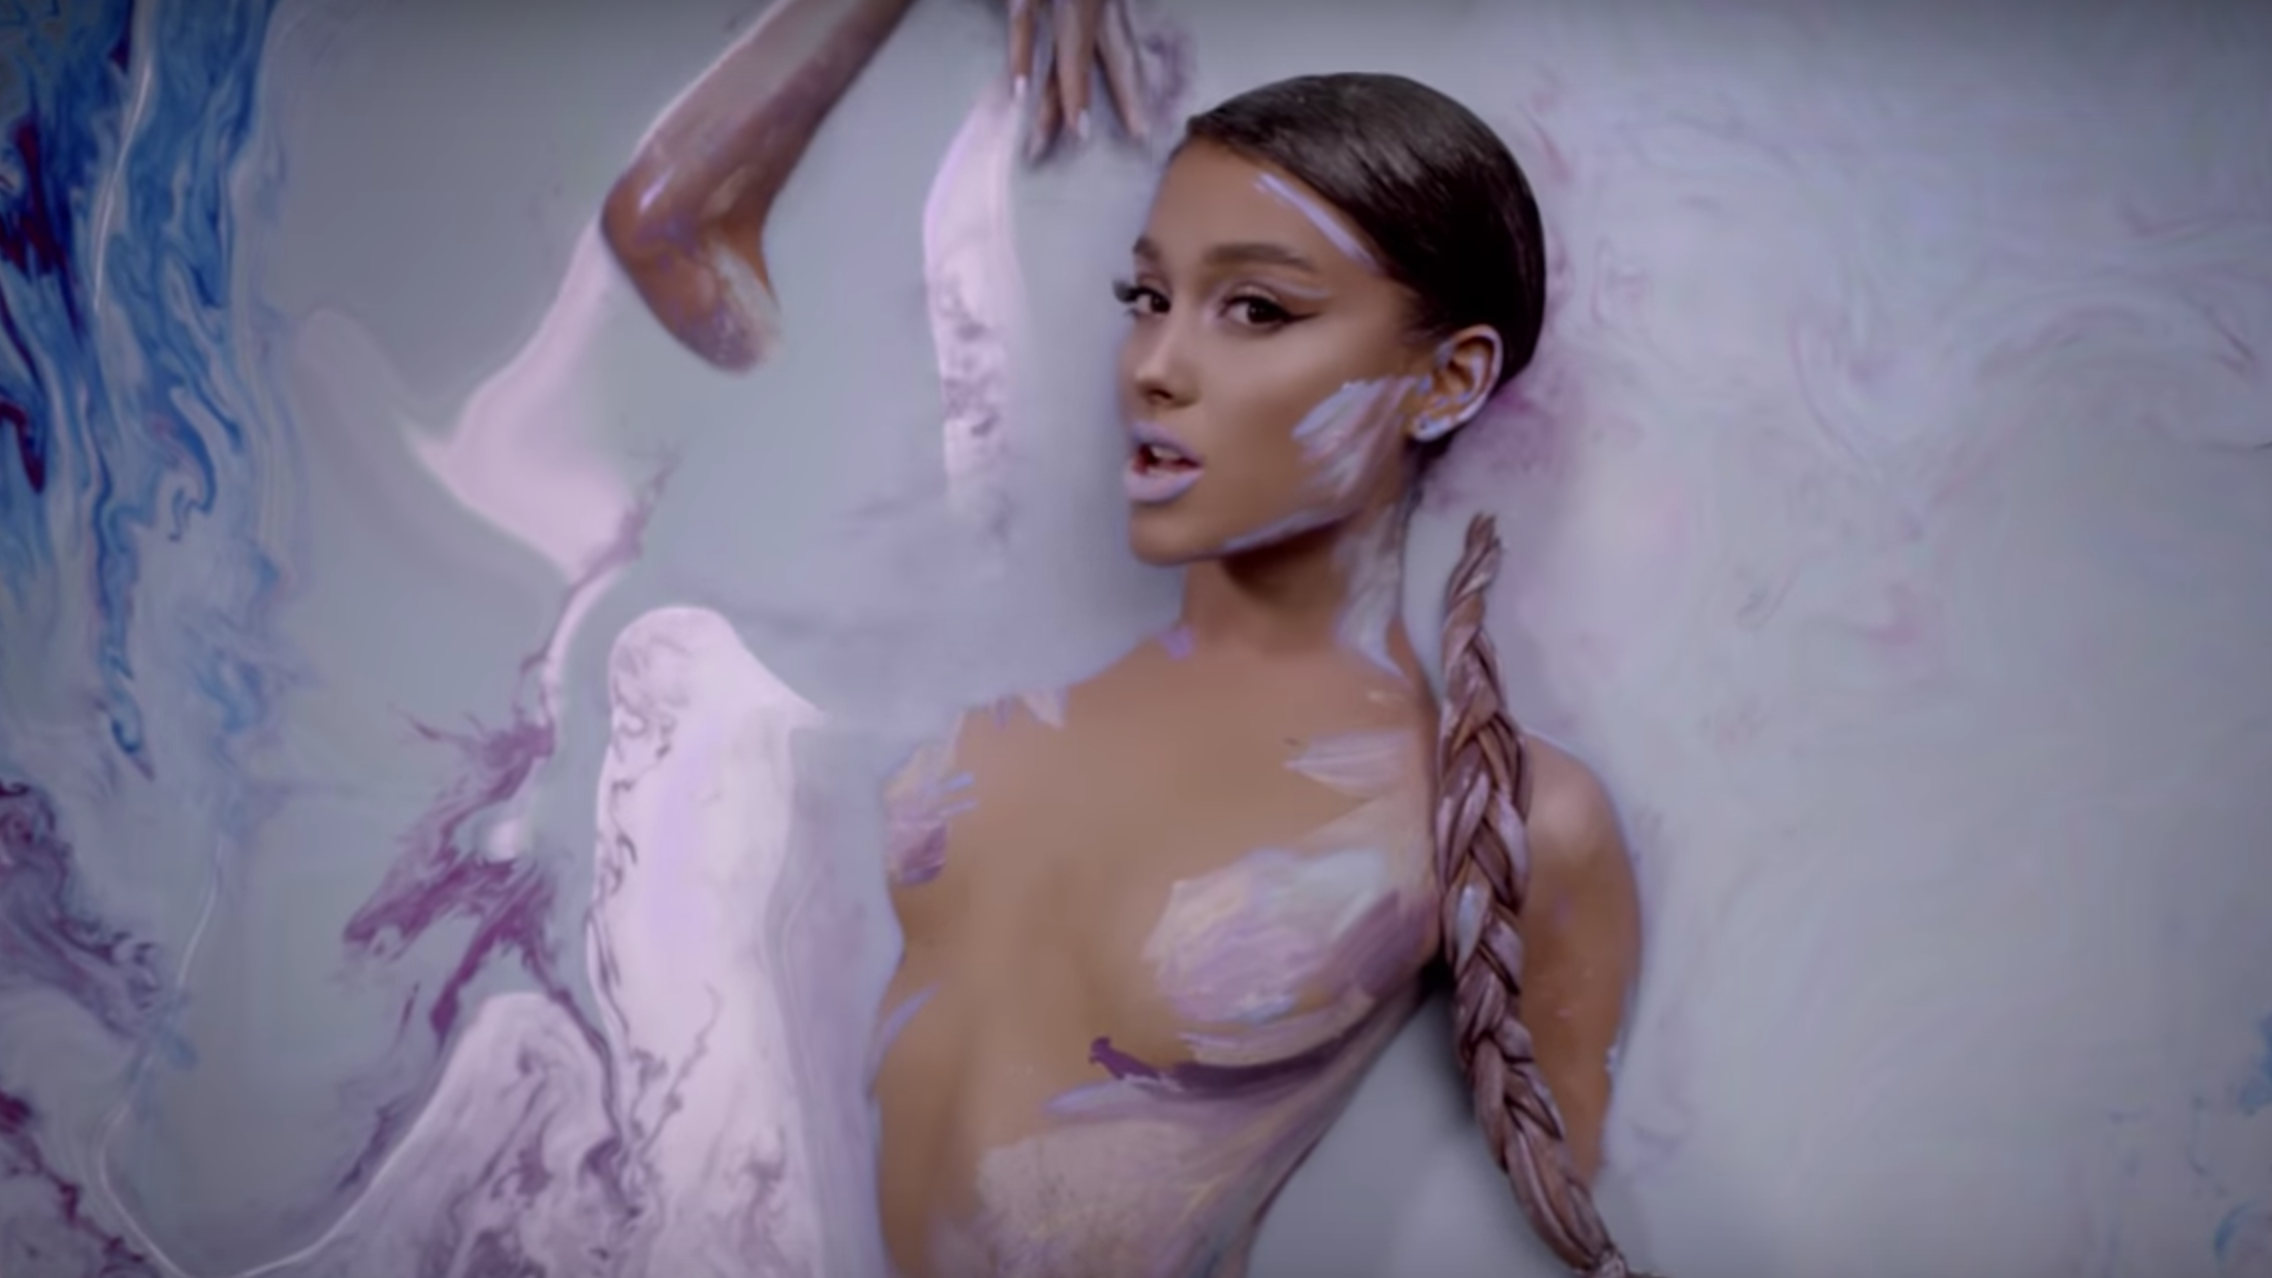 dean batchelor recommends Naked Images Of Ariana Grande